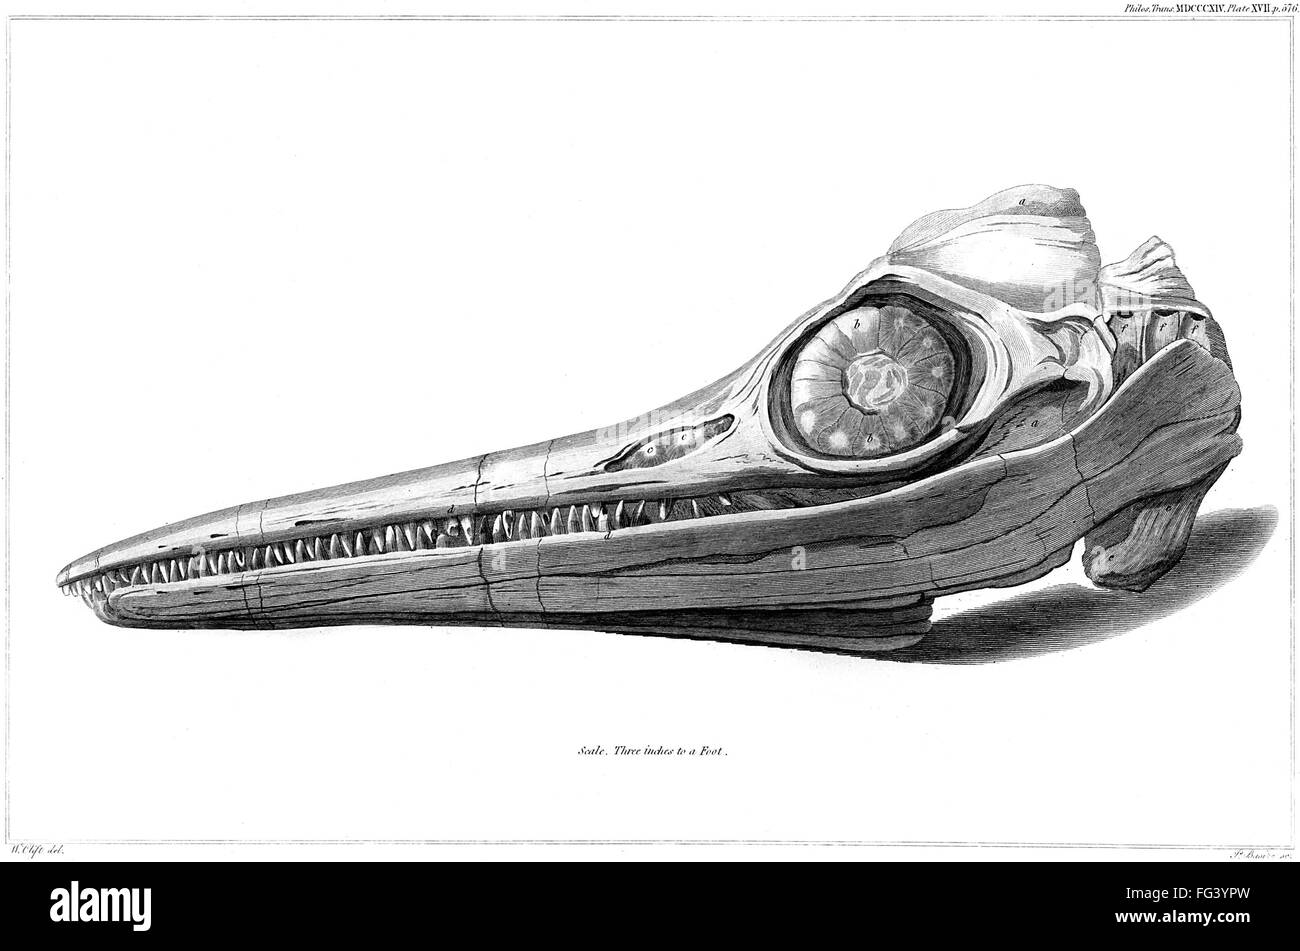 ICHTHYOSAUR, 1812. /nThe fossil skull of an ichthyosaur discovered by Joseph Anning and Mary Anning in 1812. Engraving, 1814. Stock Photo